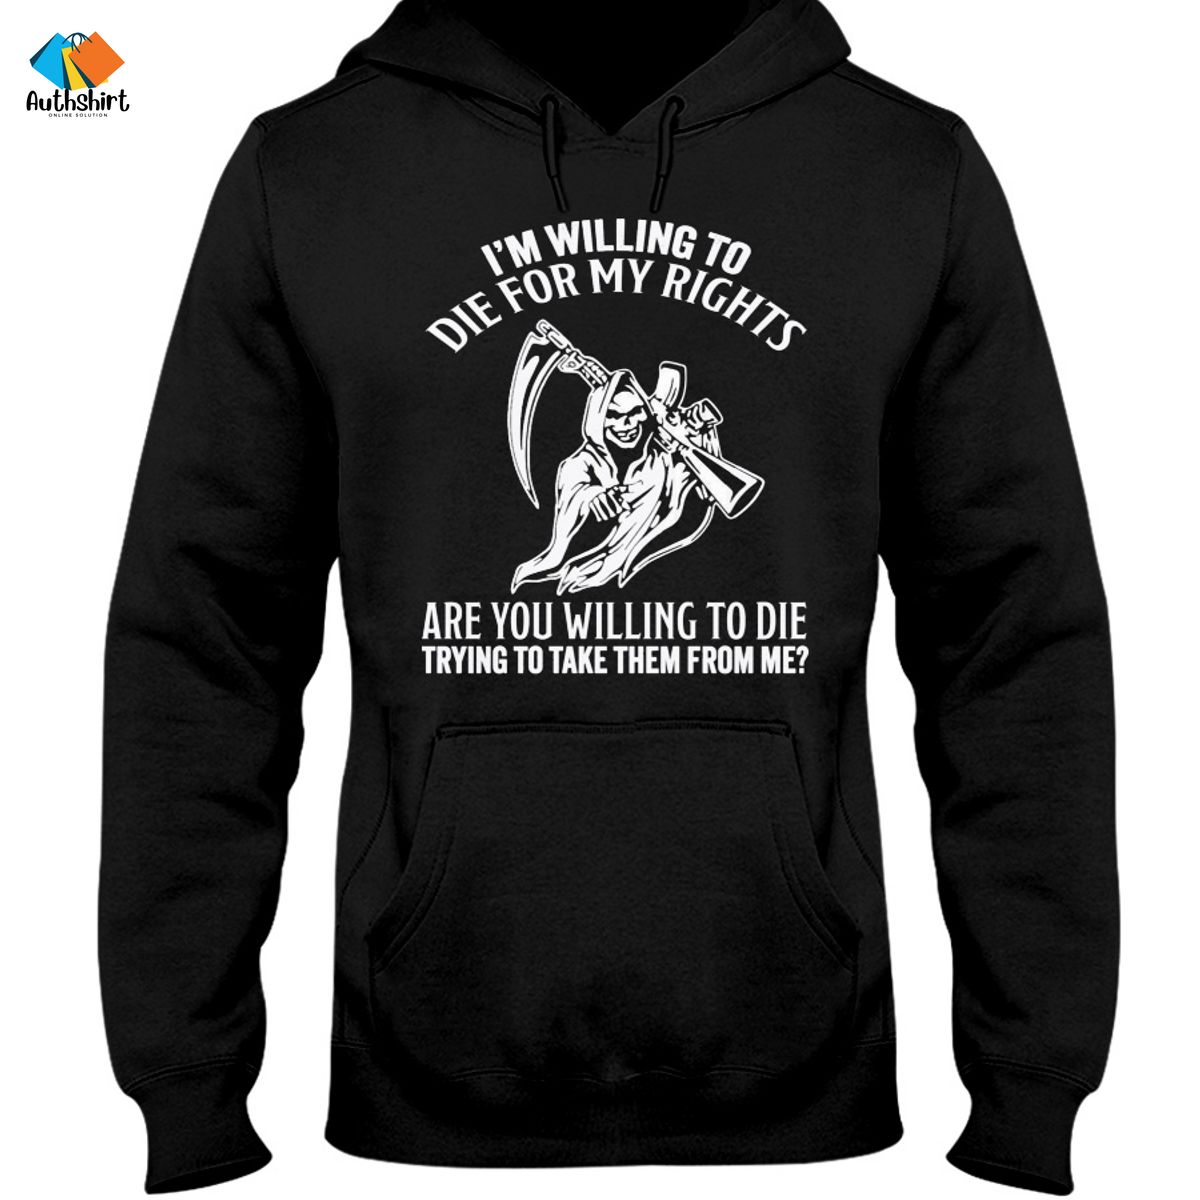 I’m Willing To Die For My Rights Are You Willing To Die Trying To Take Them From Me Shirt